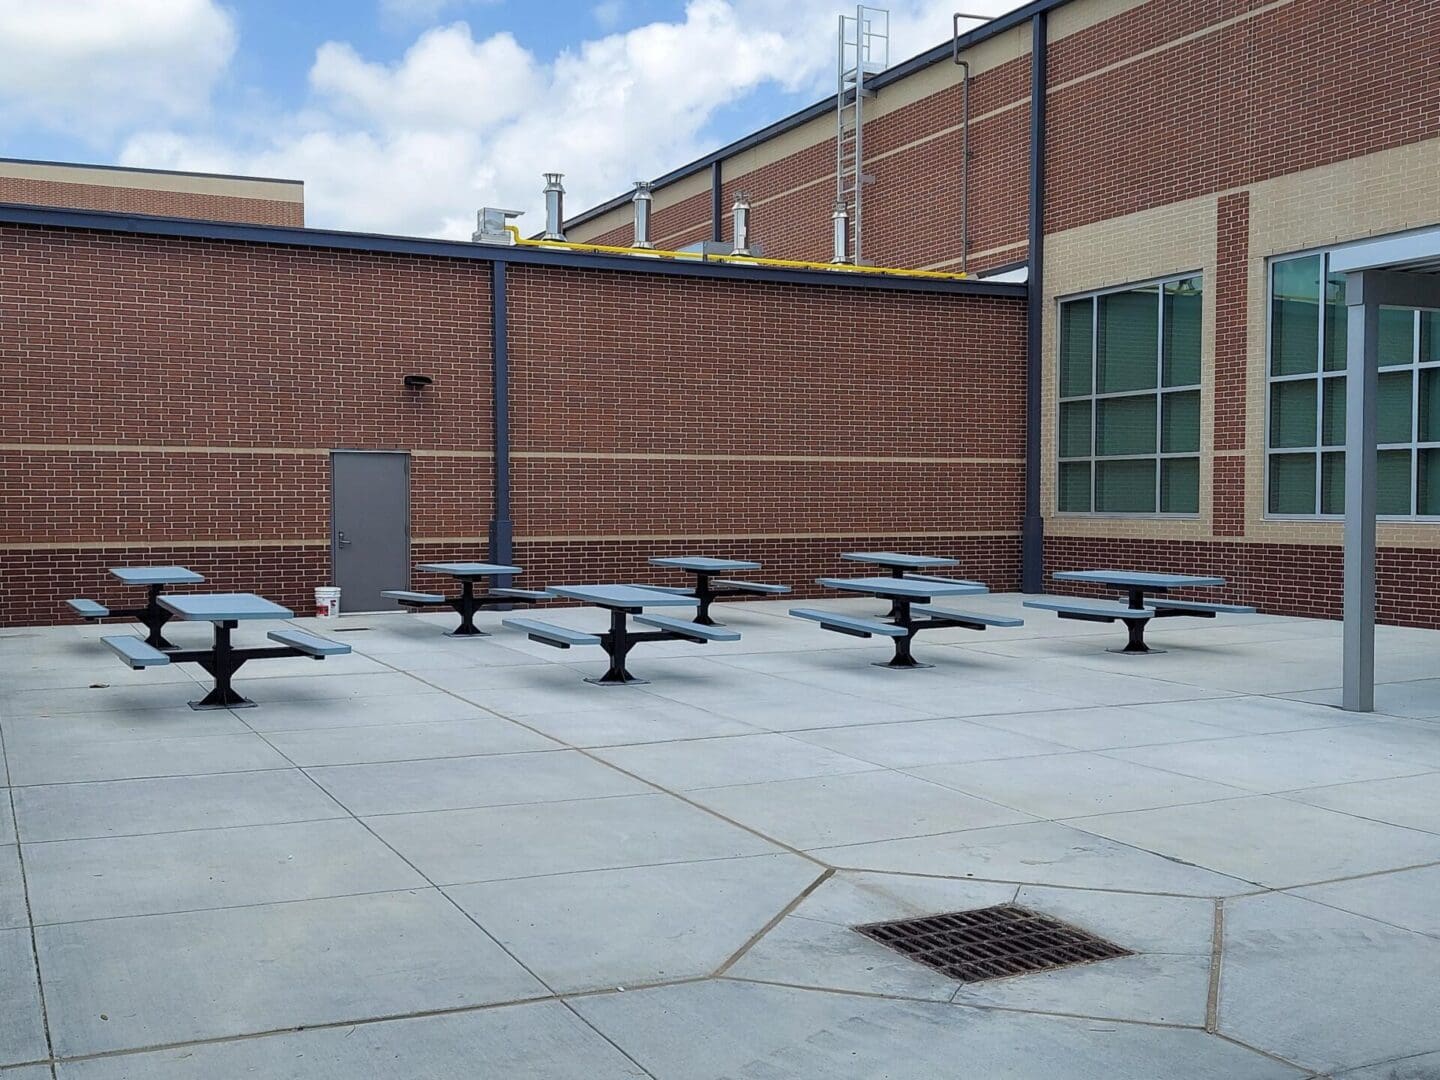 A group of tables sitting in the middle of an outdoor area.